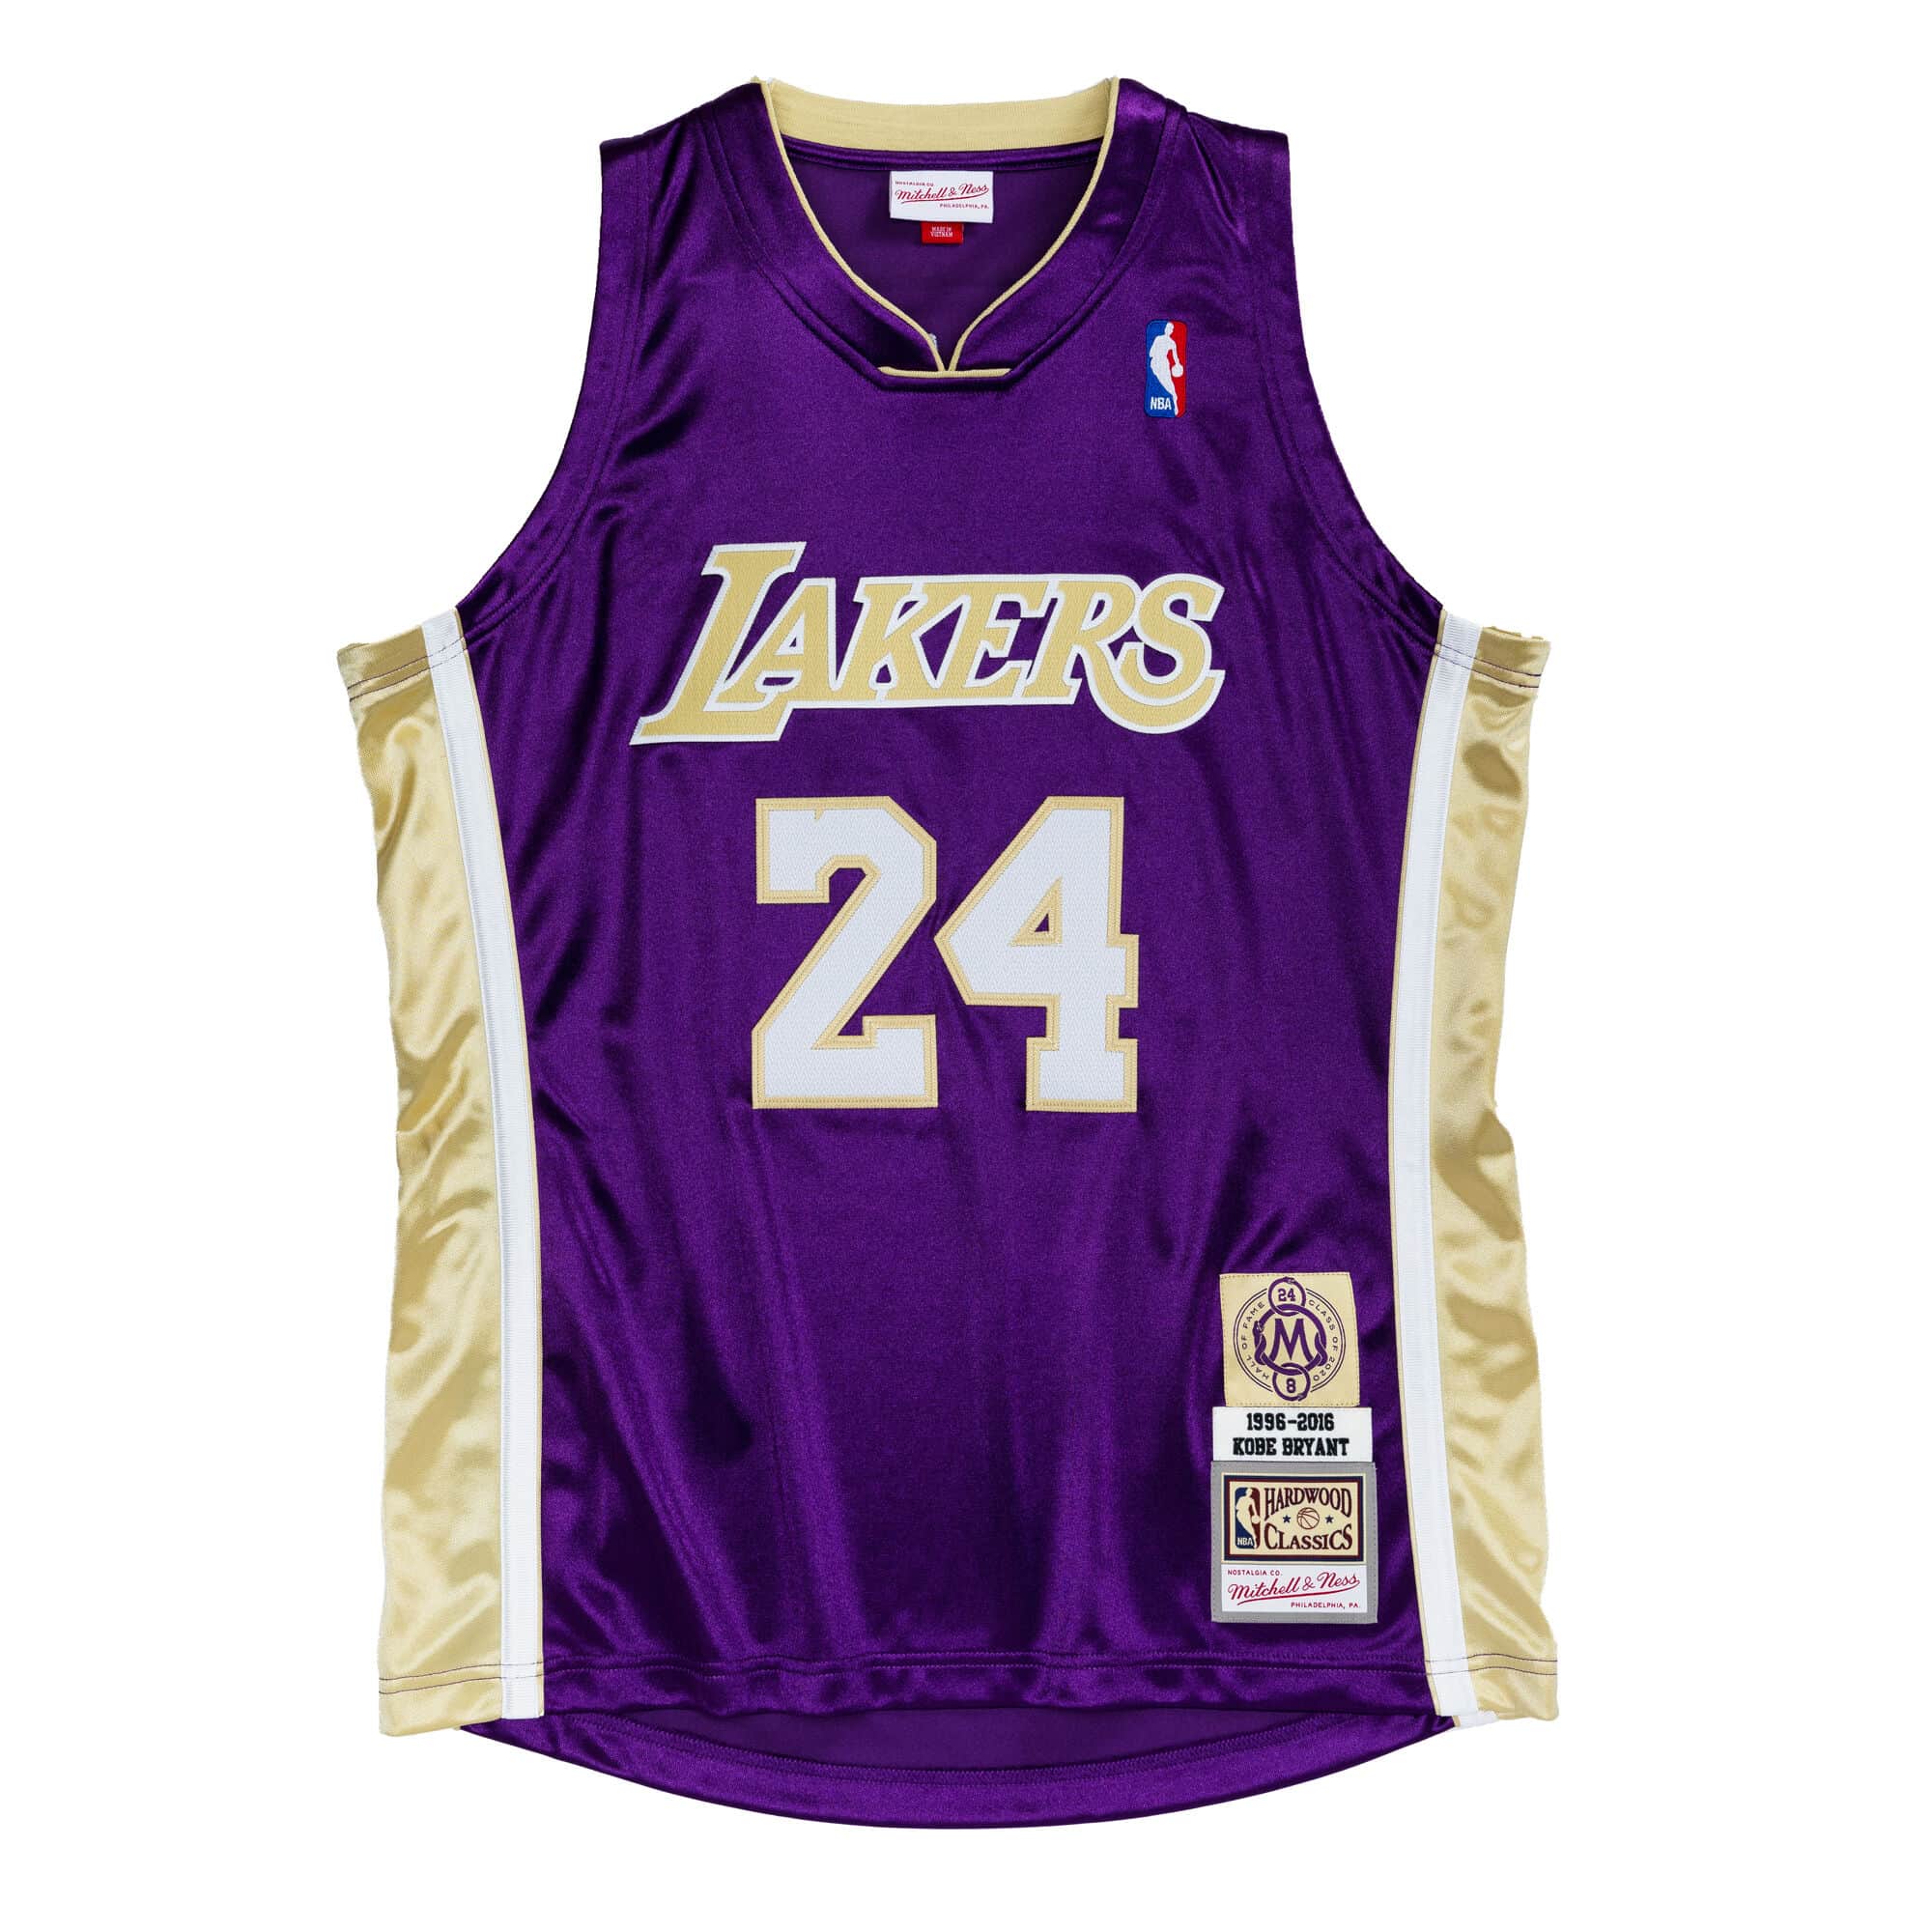 authentic kobe jersey signed